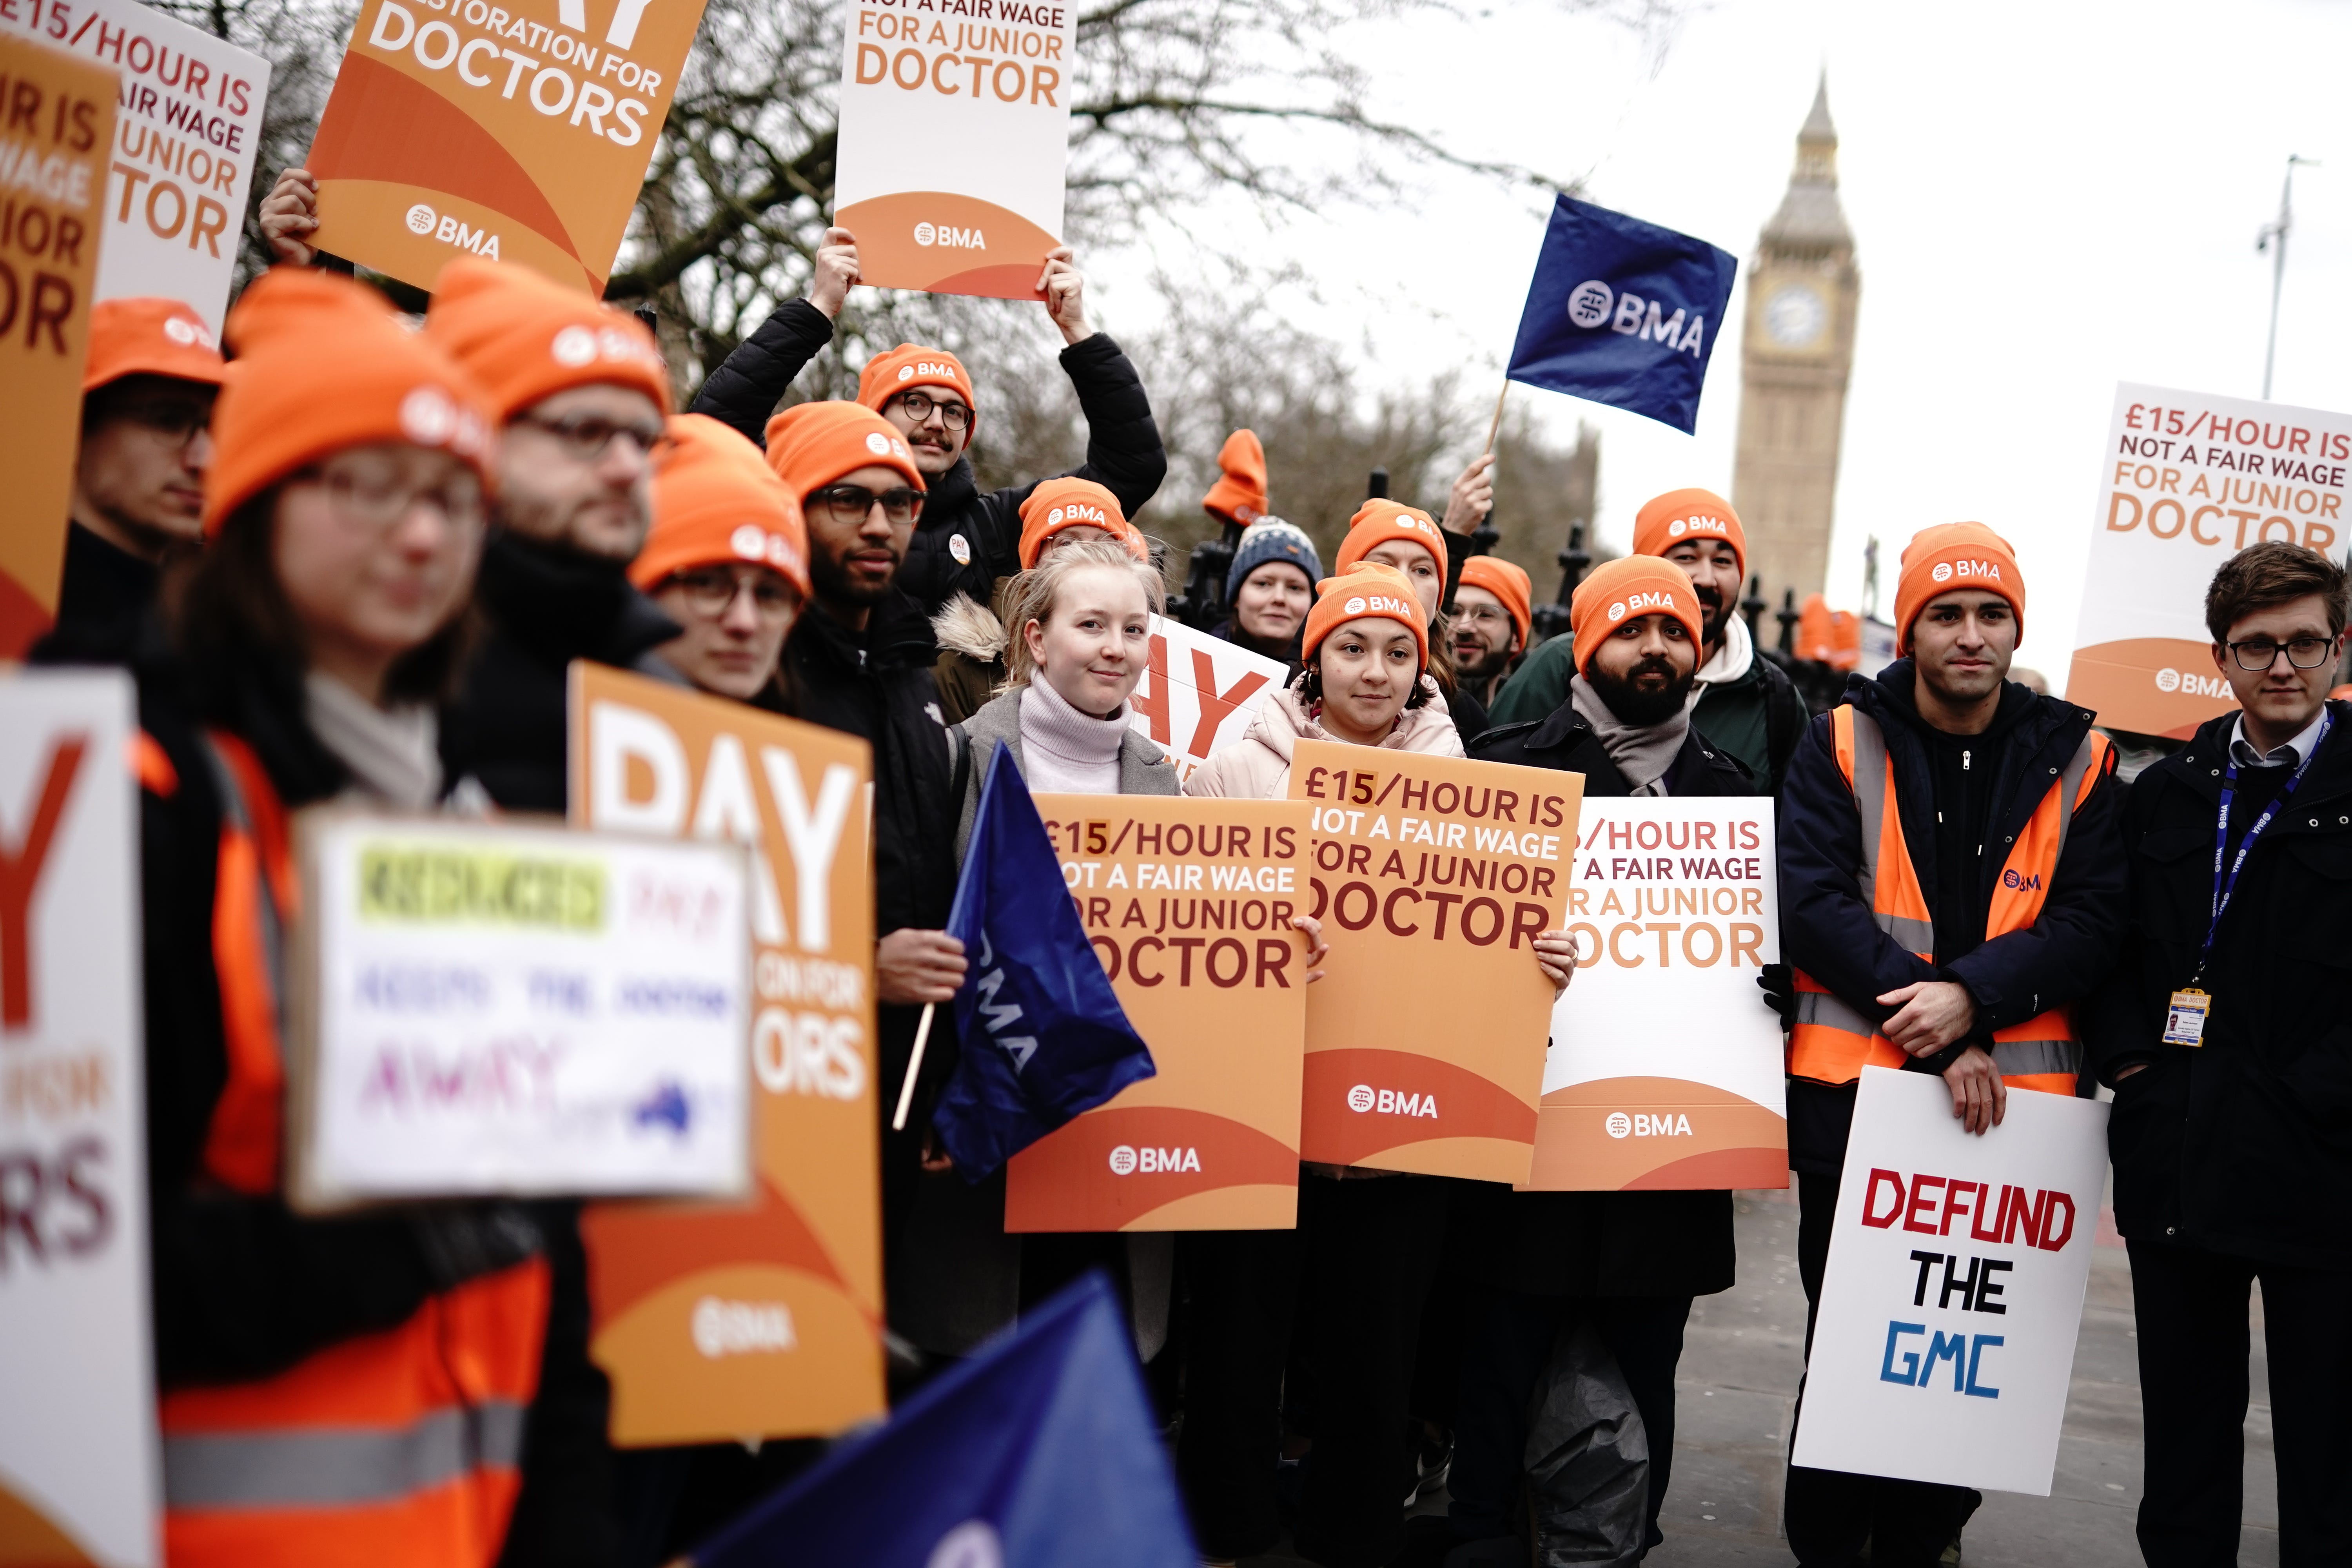 Junior doctors in England to hold strike talks with government, NHS